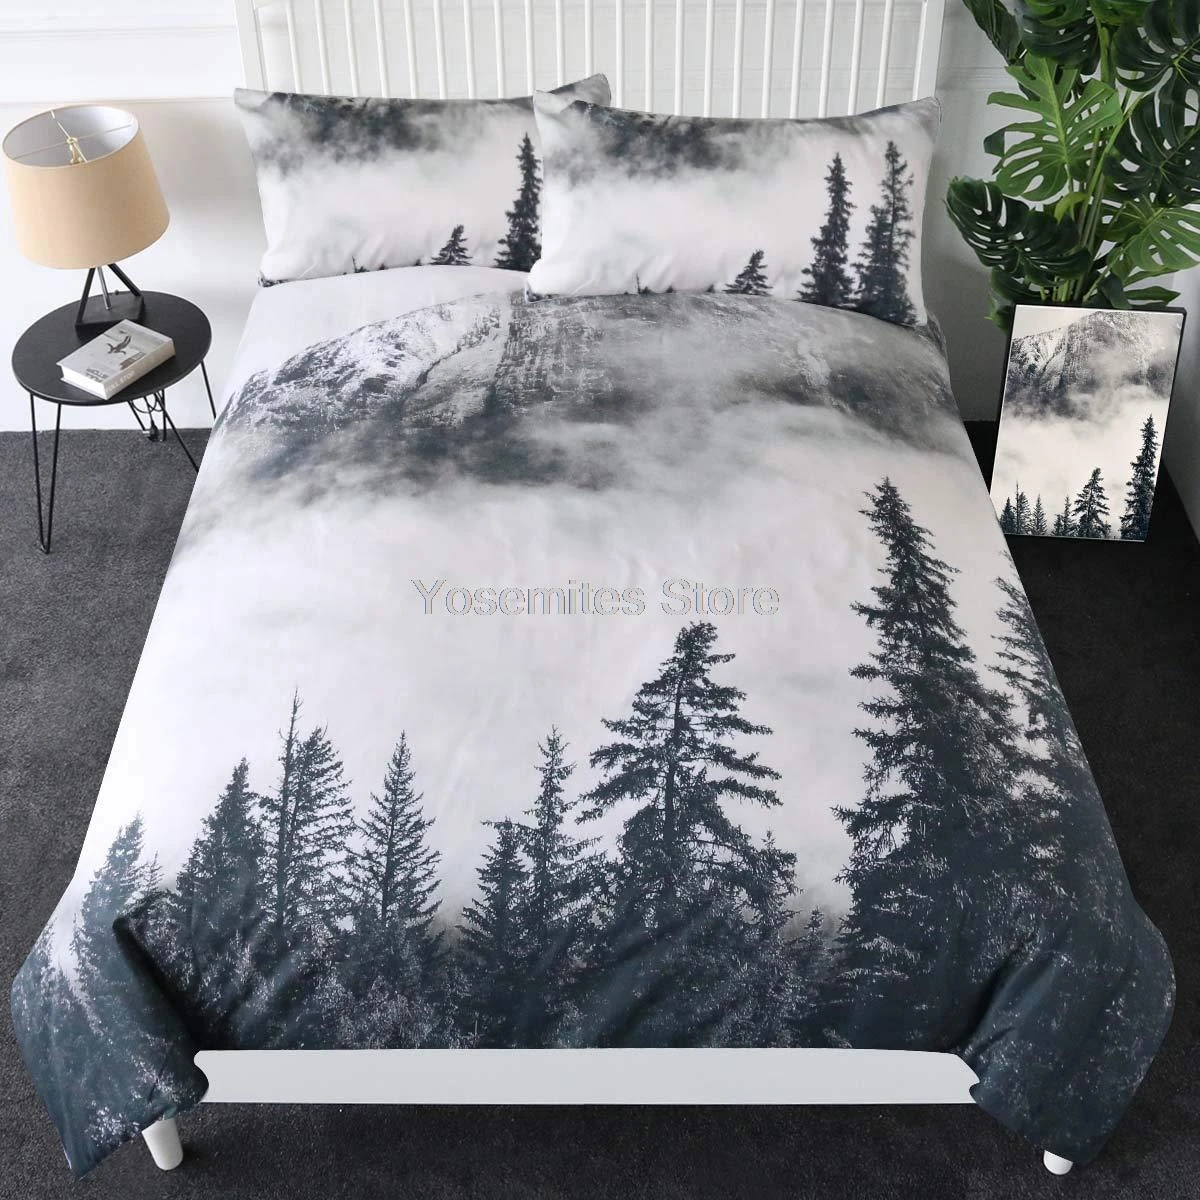 king comforter sets Sleepwish Smoky Mountain Bedding Forest Duvet Cover 3 Pieces Grey Trees Natural Scenery Art Bedspread Nature Lover Gift (Queen) Bedding Sets medium